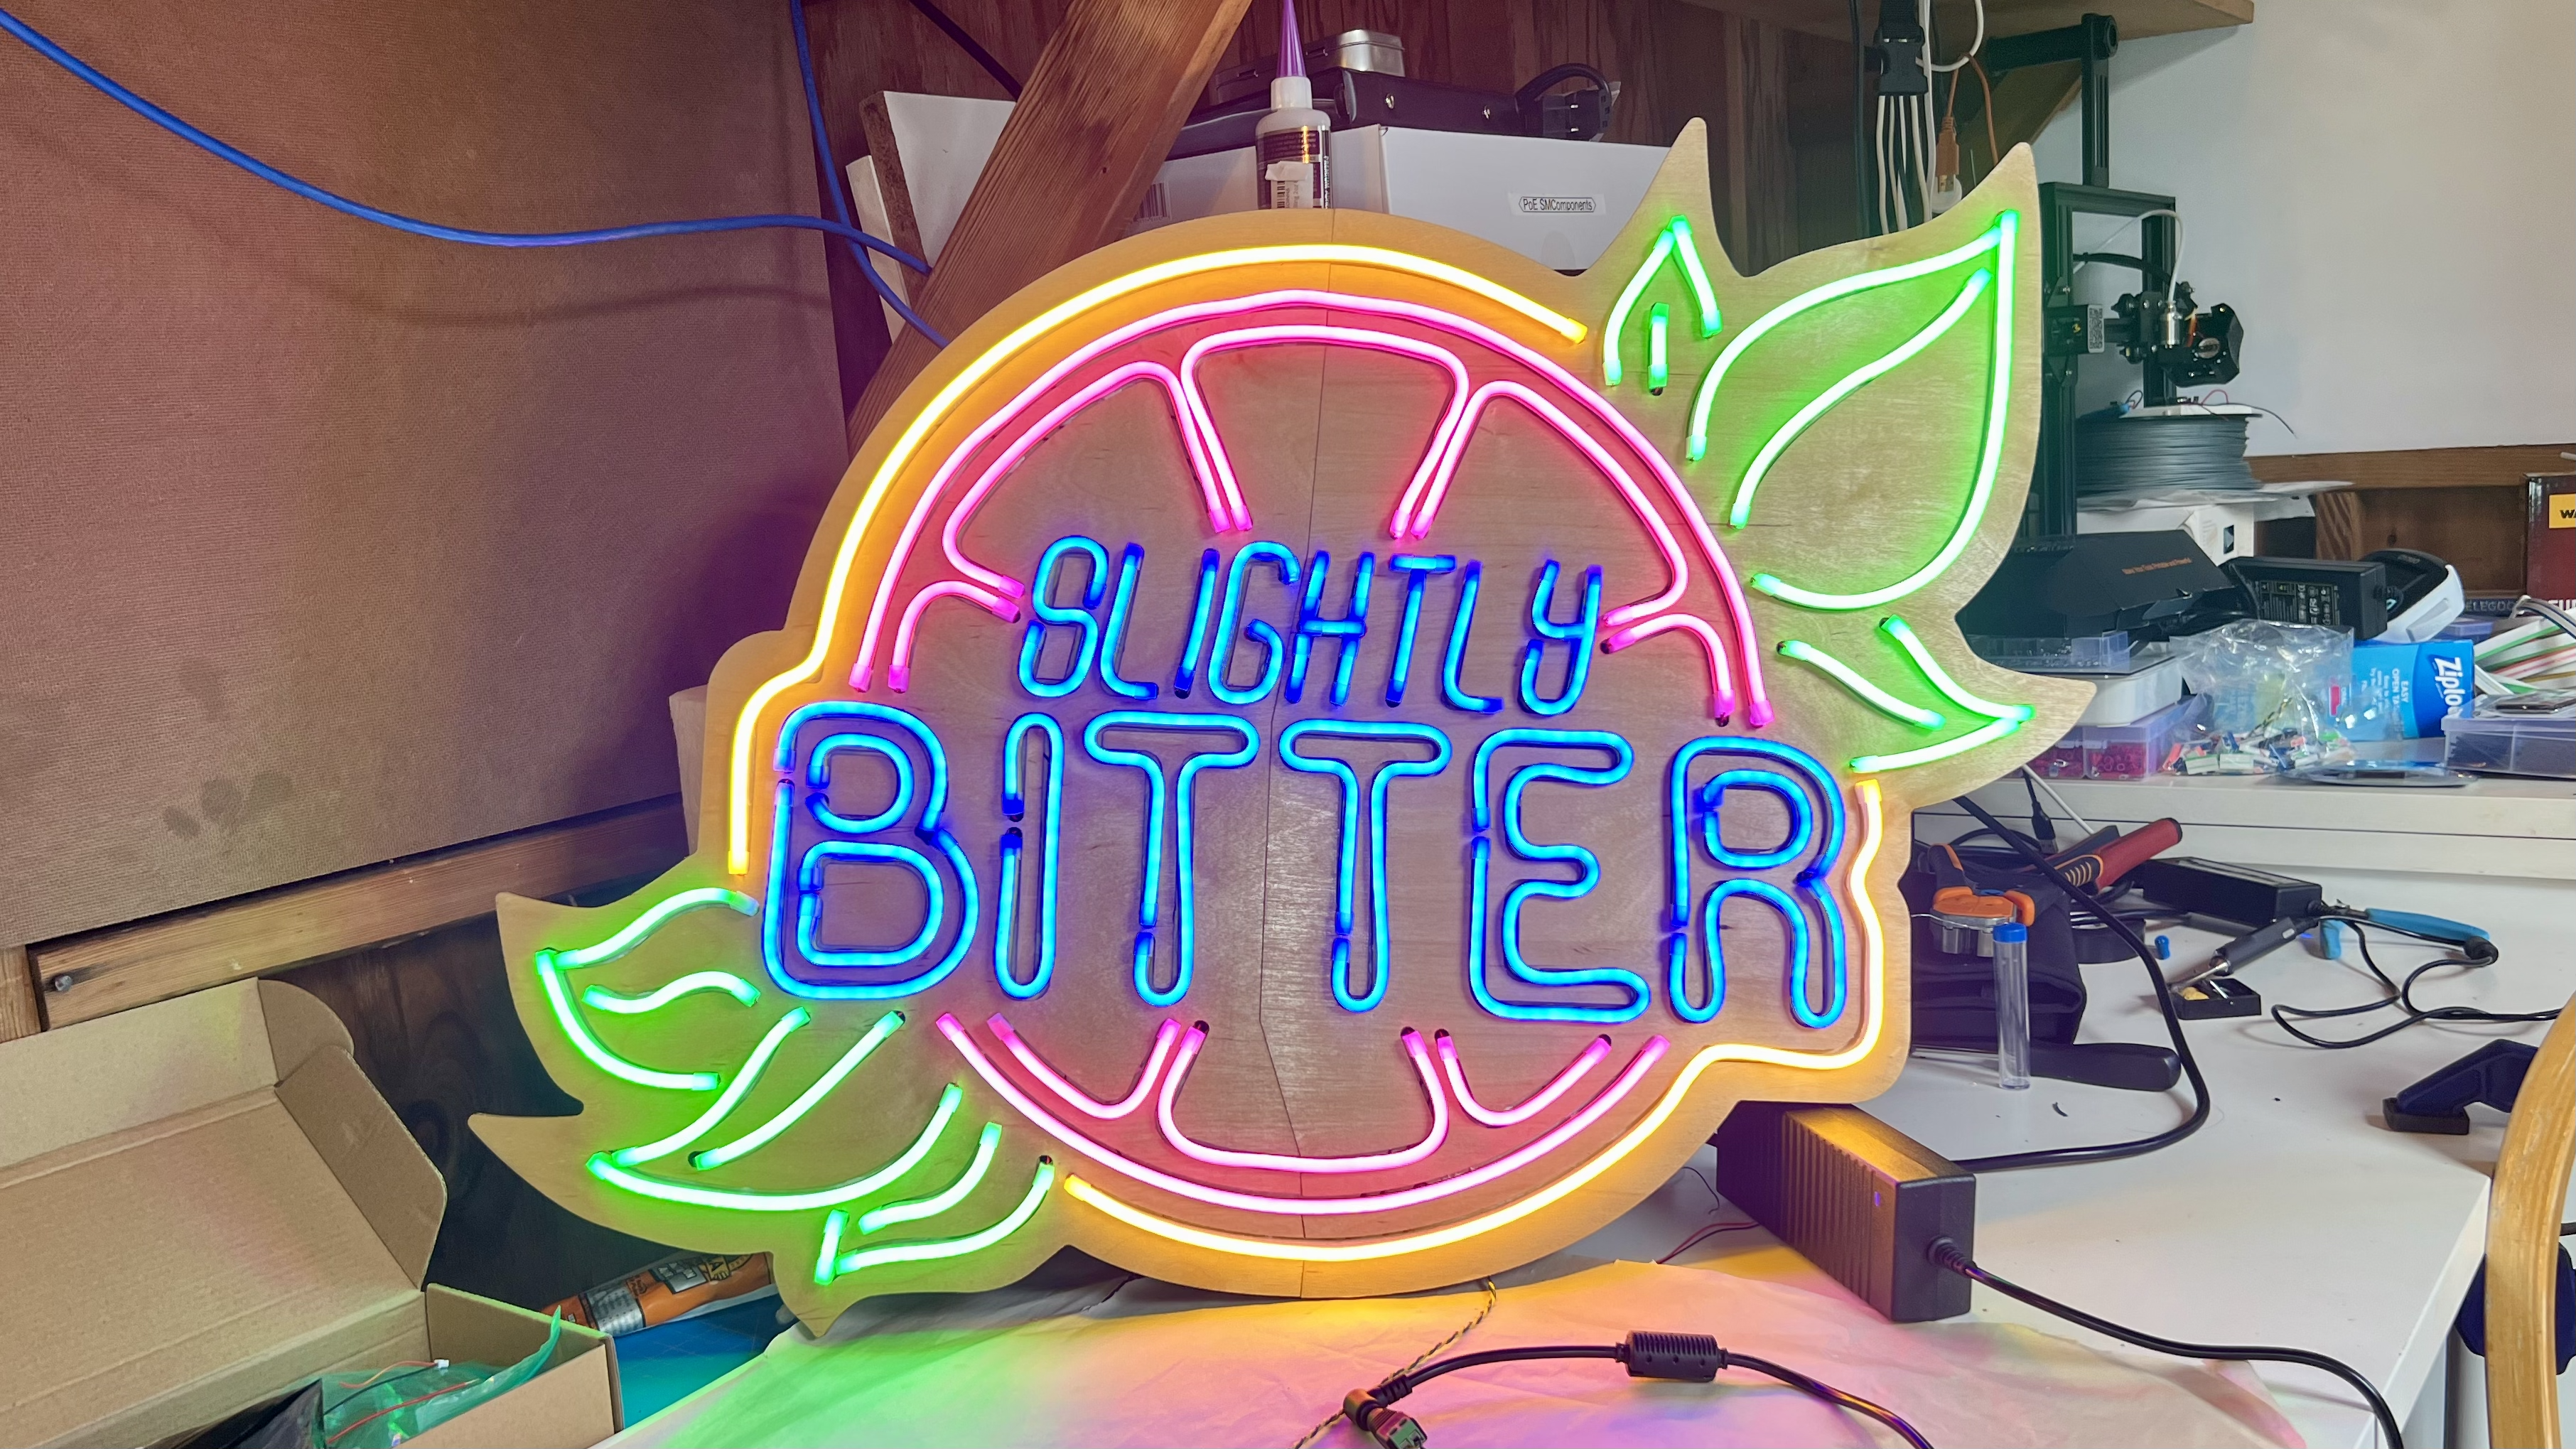 Final LED sign assembled. Sign is a grapefruit with the words "Slightly Bitter" written through the center